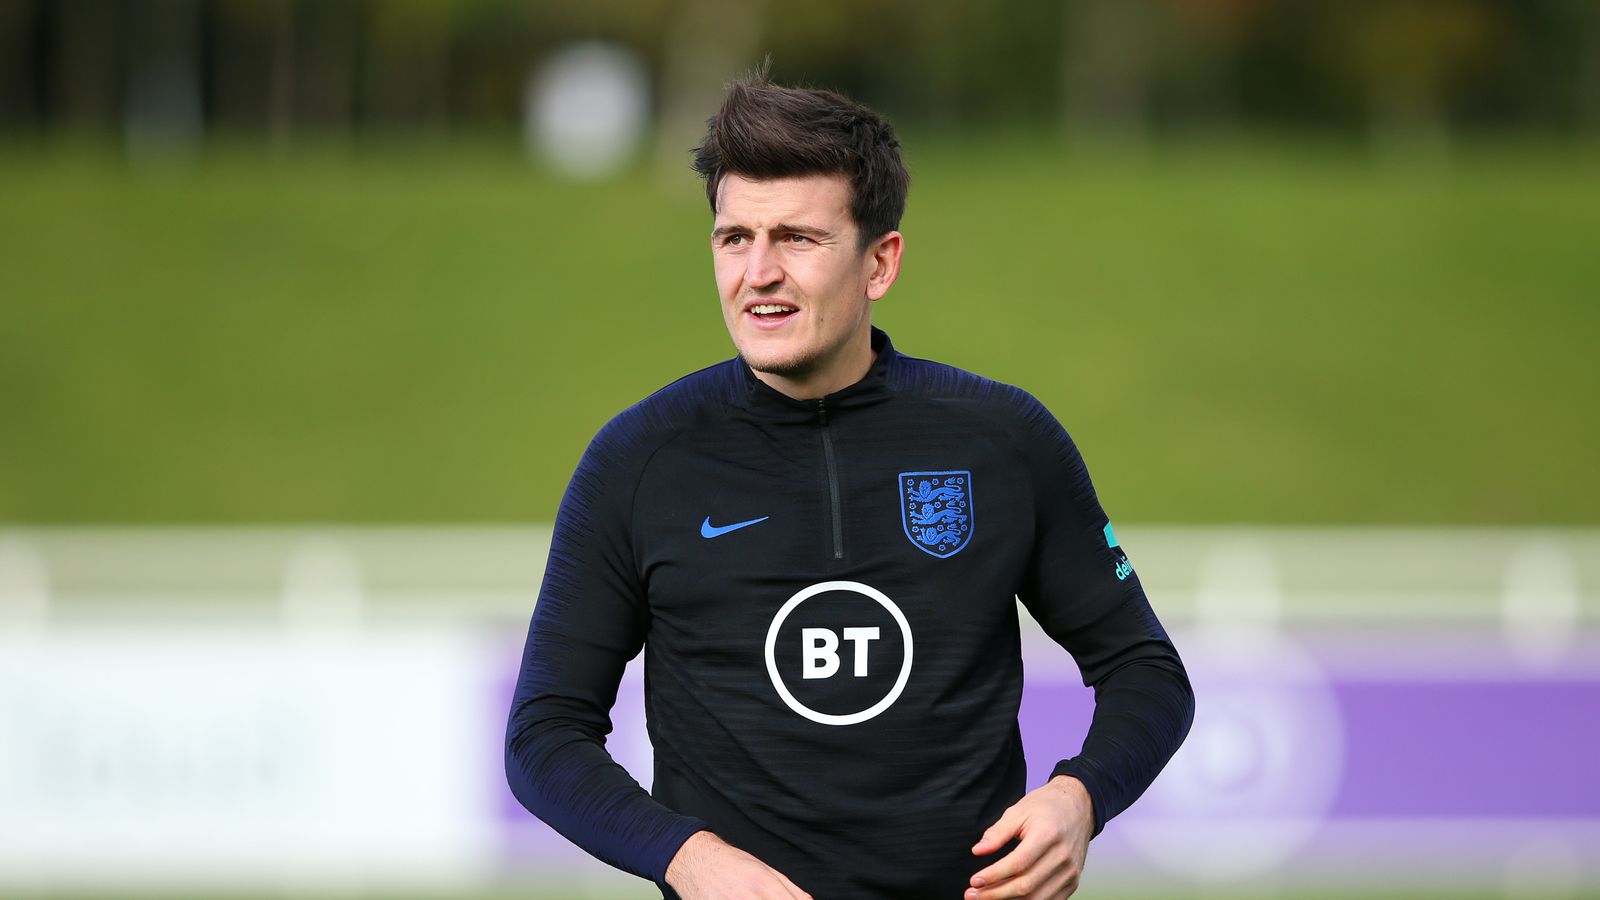 England include Harry Maguire in squad; Phil Foden, Mason Greenwood also called up | Football News